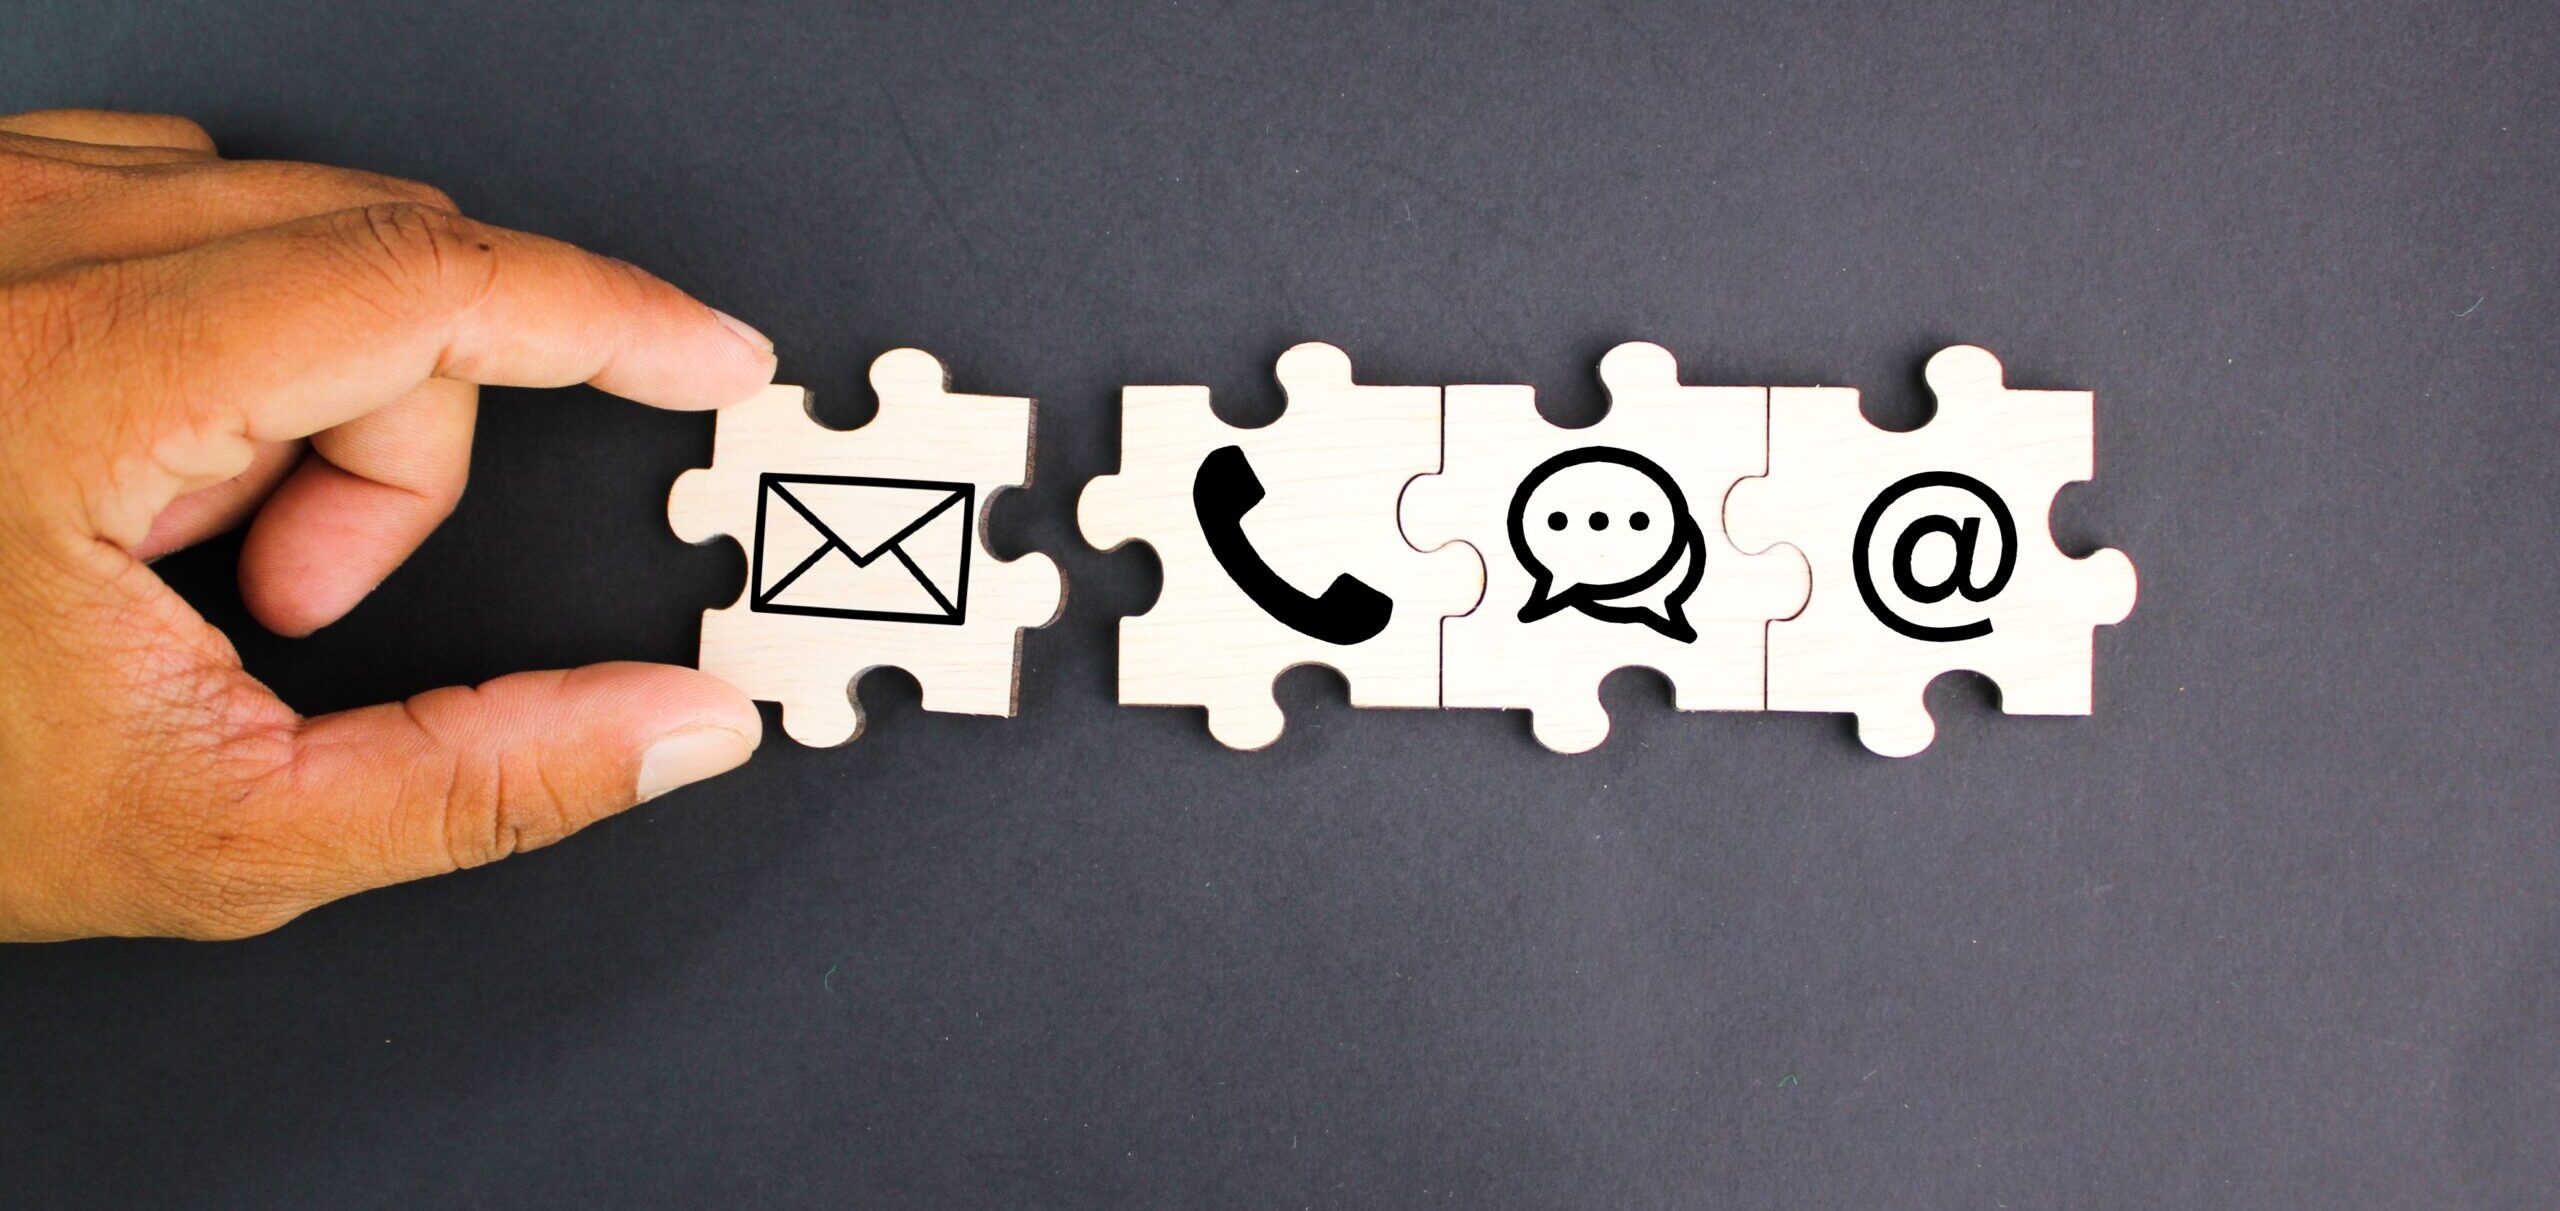 Fingers placing a puzzle piece depicting an email symbol next to pieces with a phone, chat clouds, and at symbol.